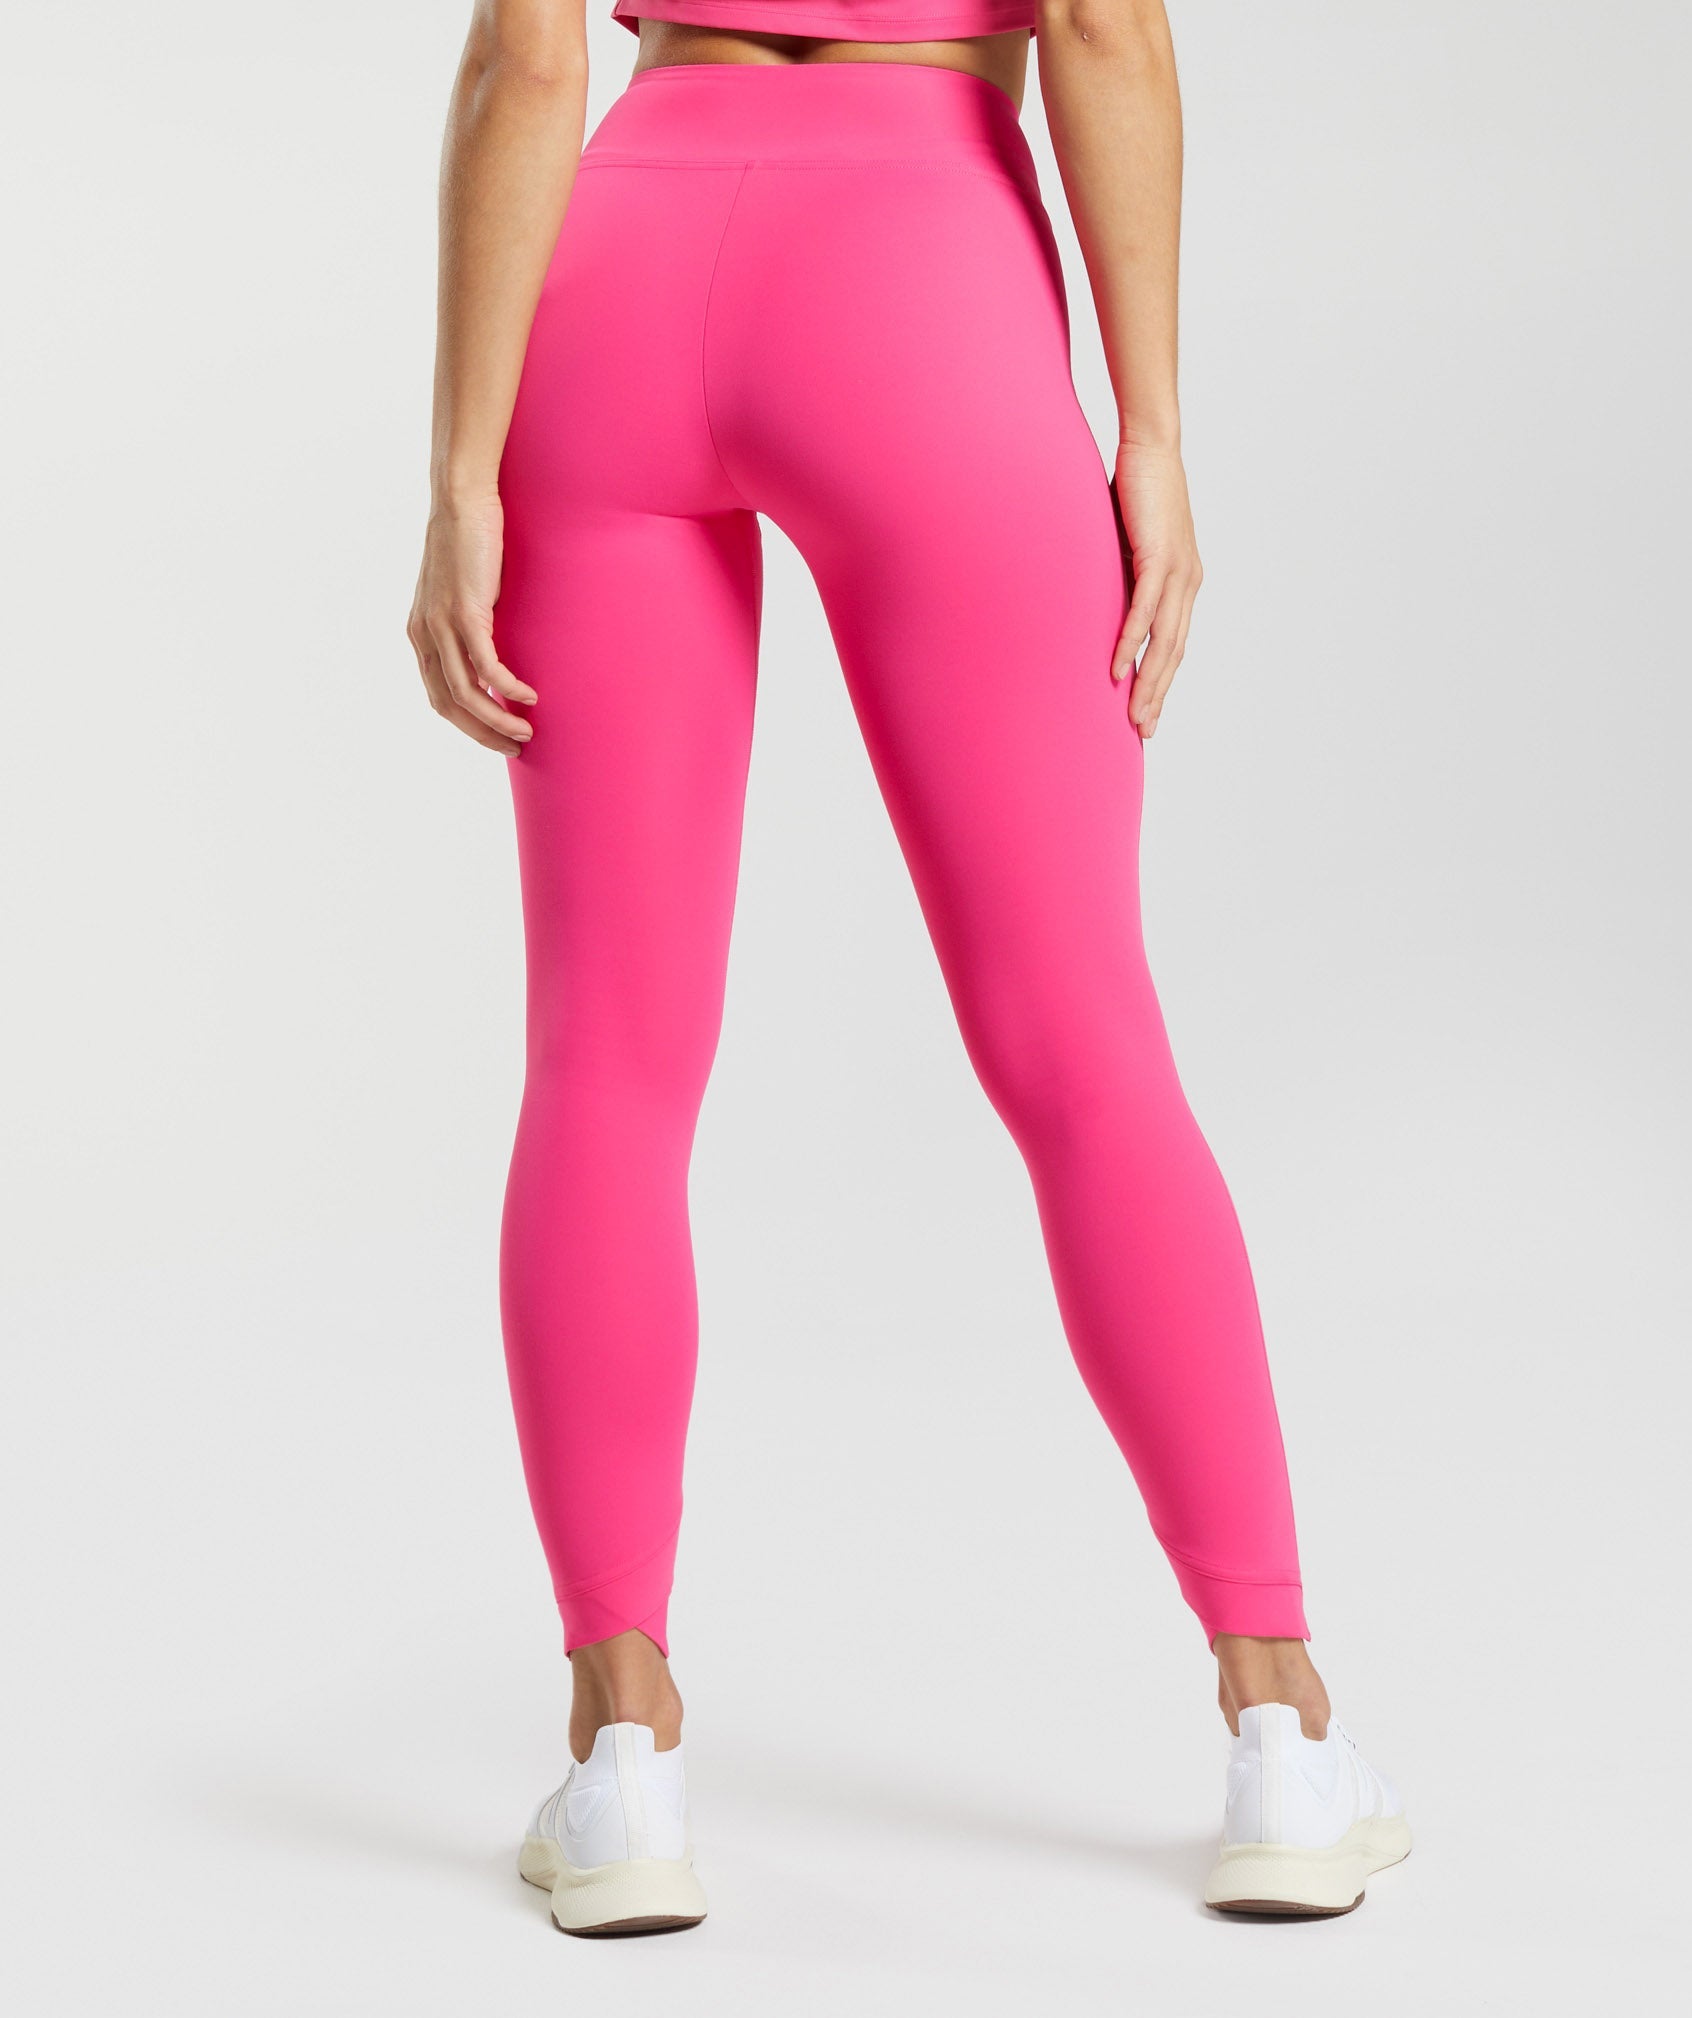 Bright pink high-waist leggings | A stand-out color - wild peach clothing